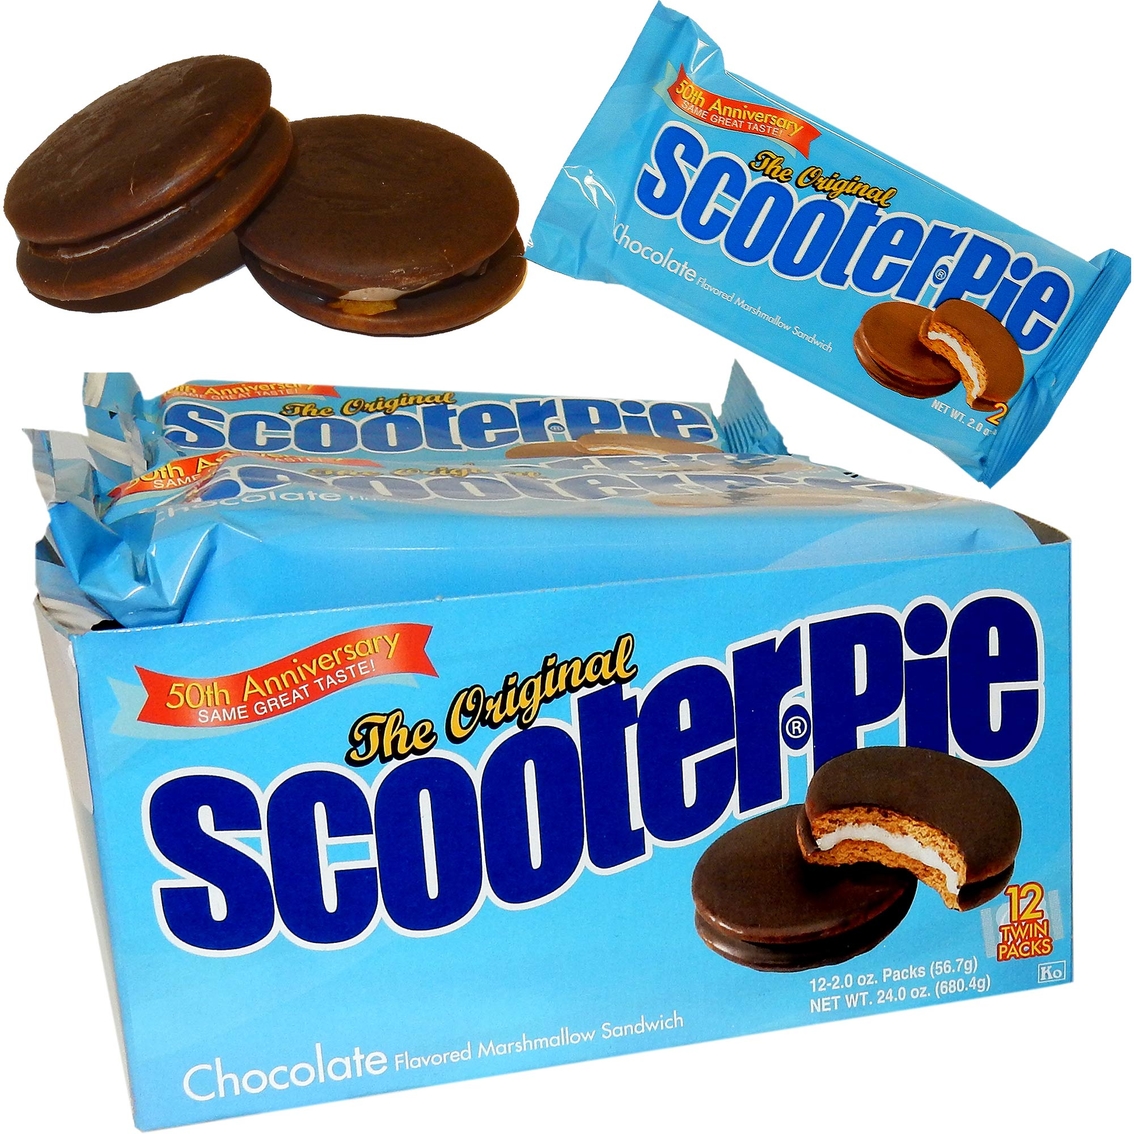 Image result for scooter pies pics